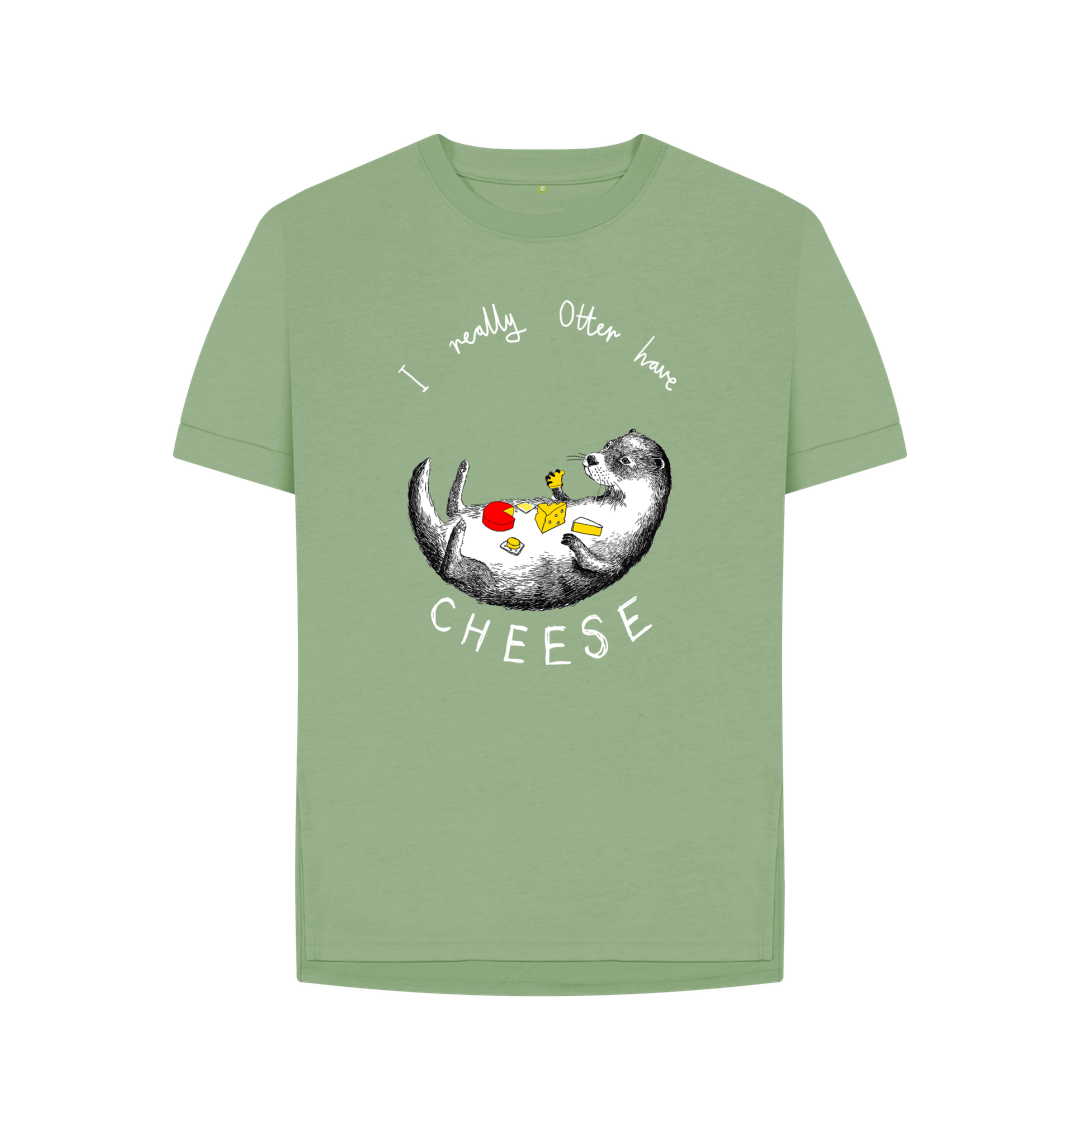 Sage 'I Really Otter Have Cheese!' Women's T-shirt